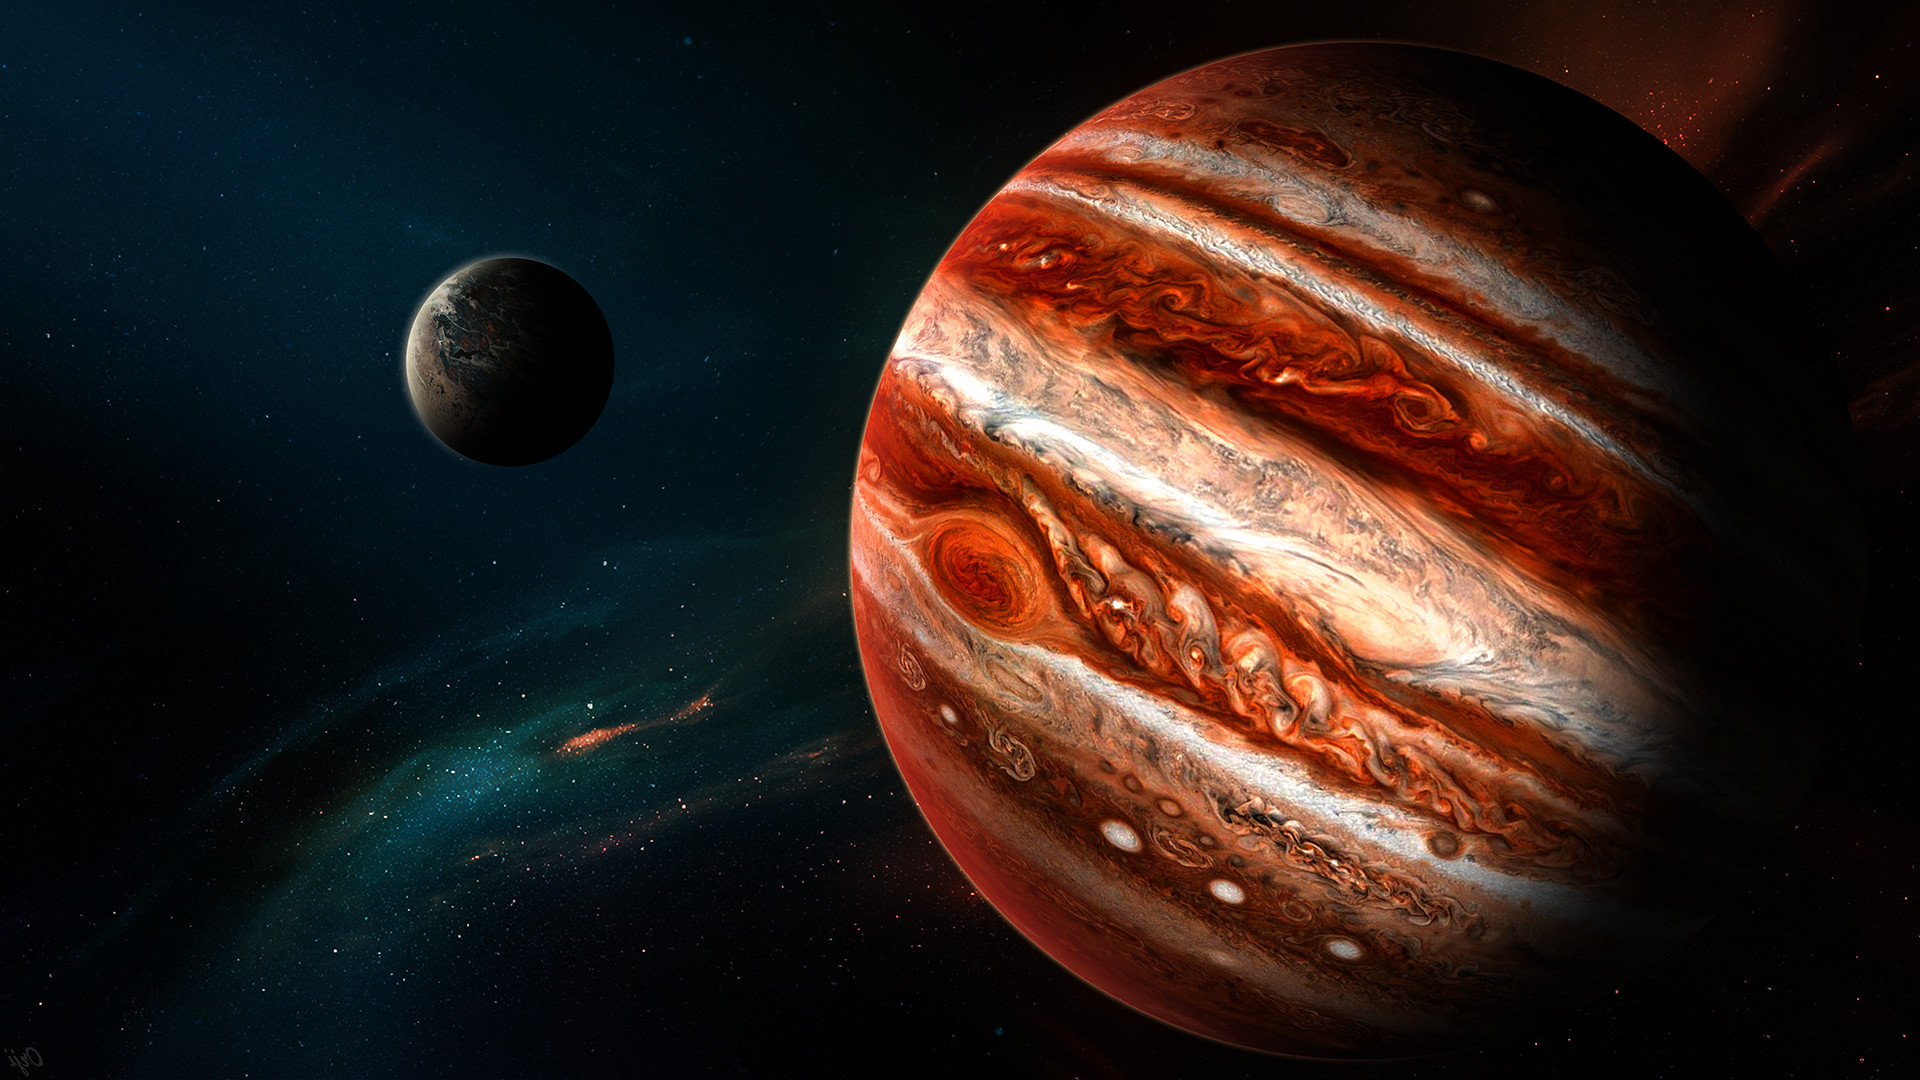 Download Px Jupiter Space Hd Wallpapers For Free - Jupiter Wallpaper Hd - HD Wallpaper 